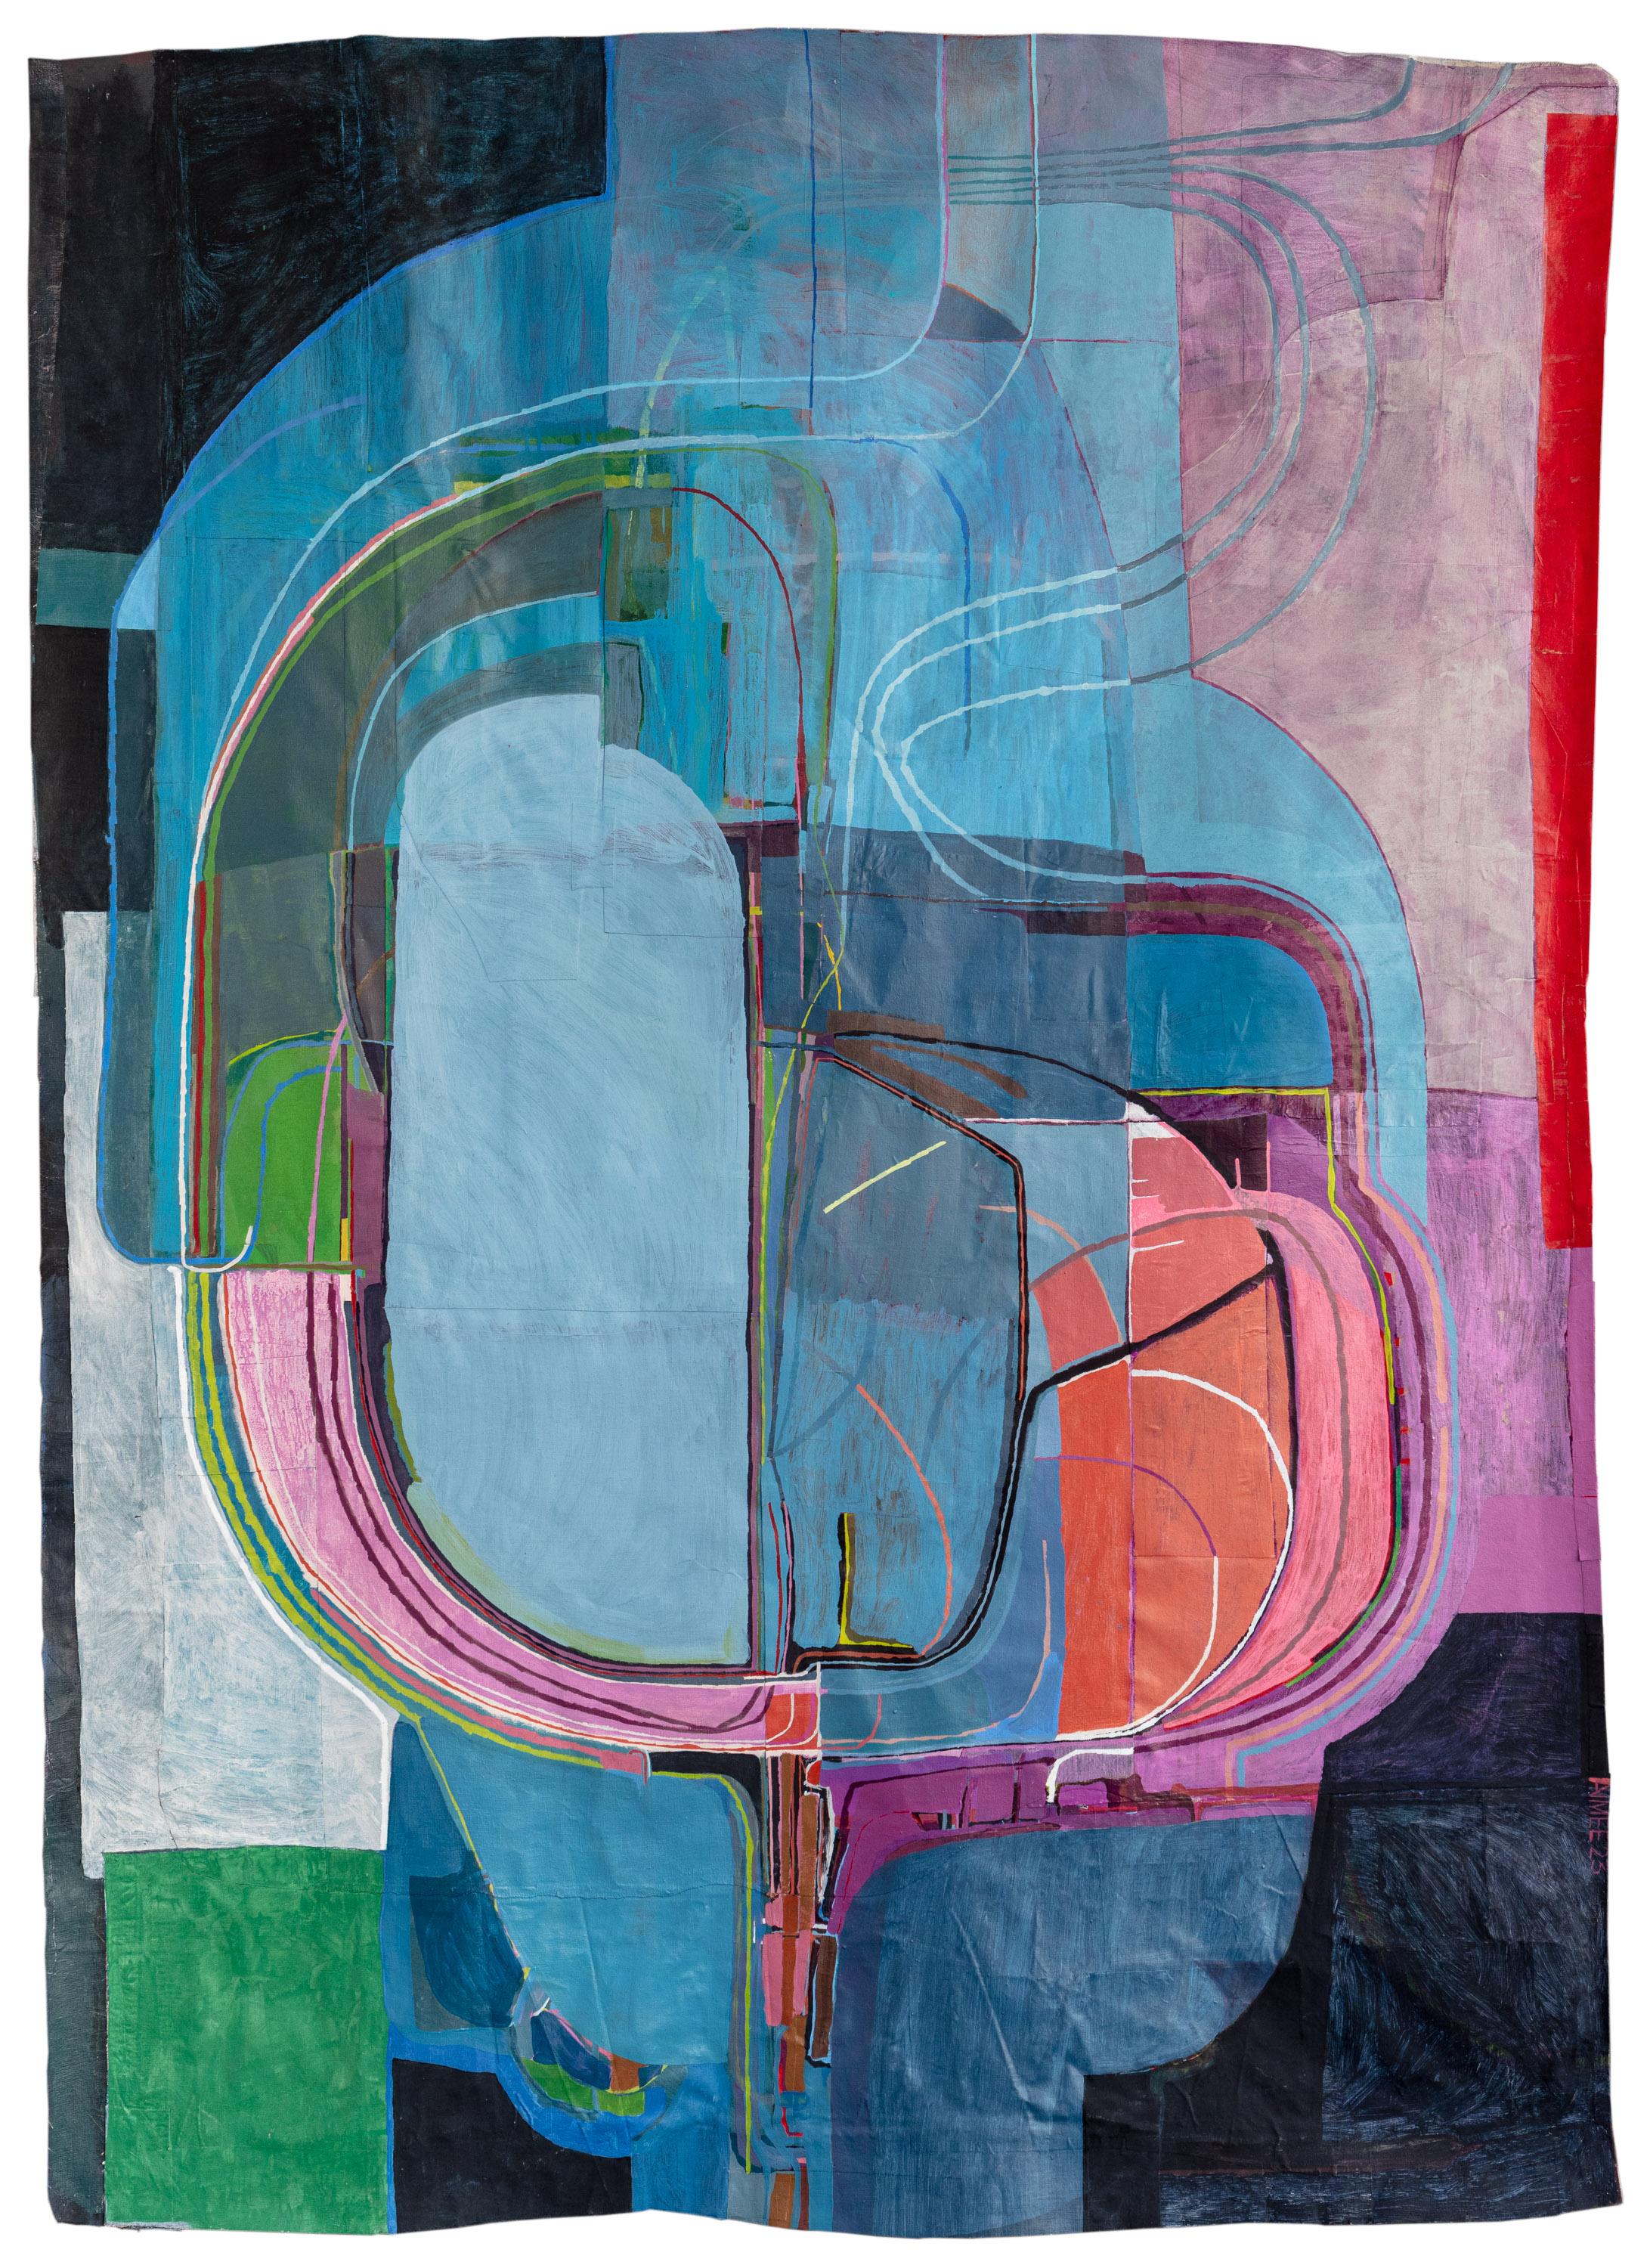 Driven by her love of materials and process, New Orleans artist Aimée Farnet Siegel works with color, line, and form through the building and manipulation of paper, paint, and canvas. Siegel received her BFA from Louisiana State University and later